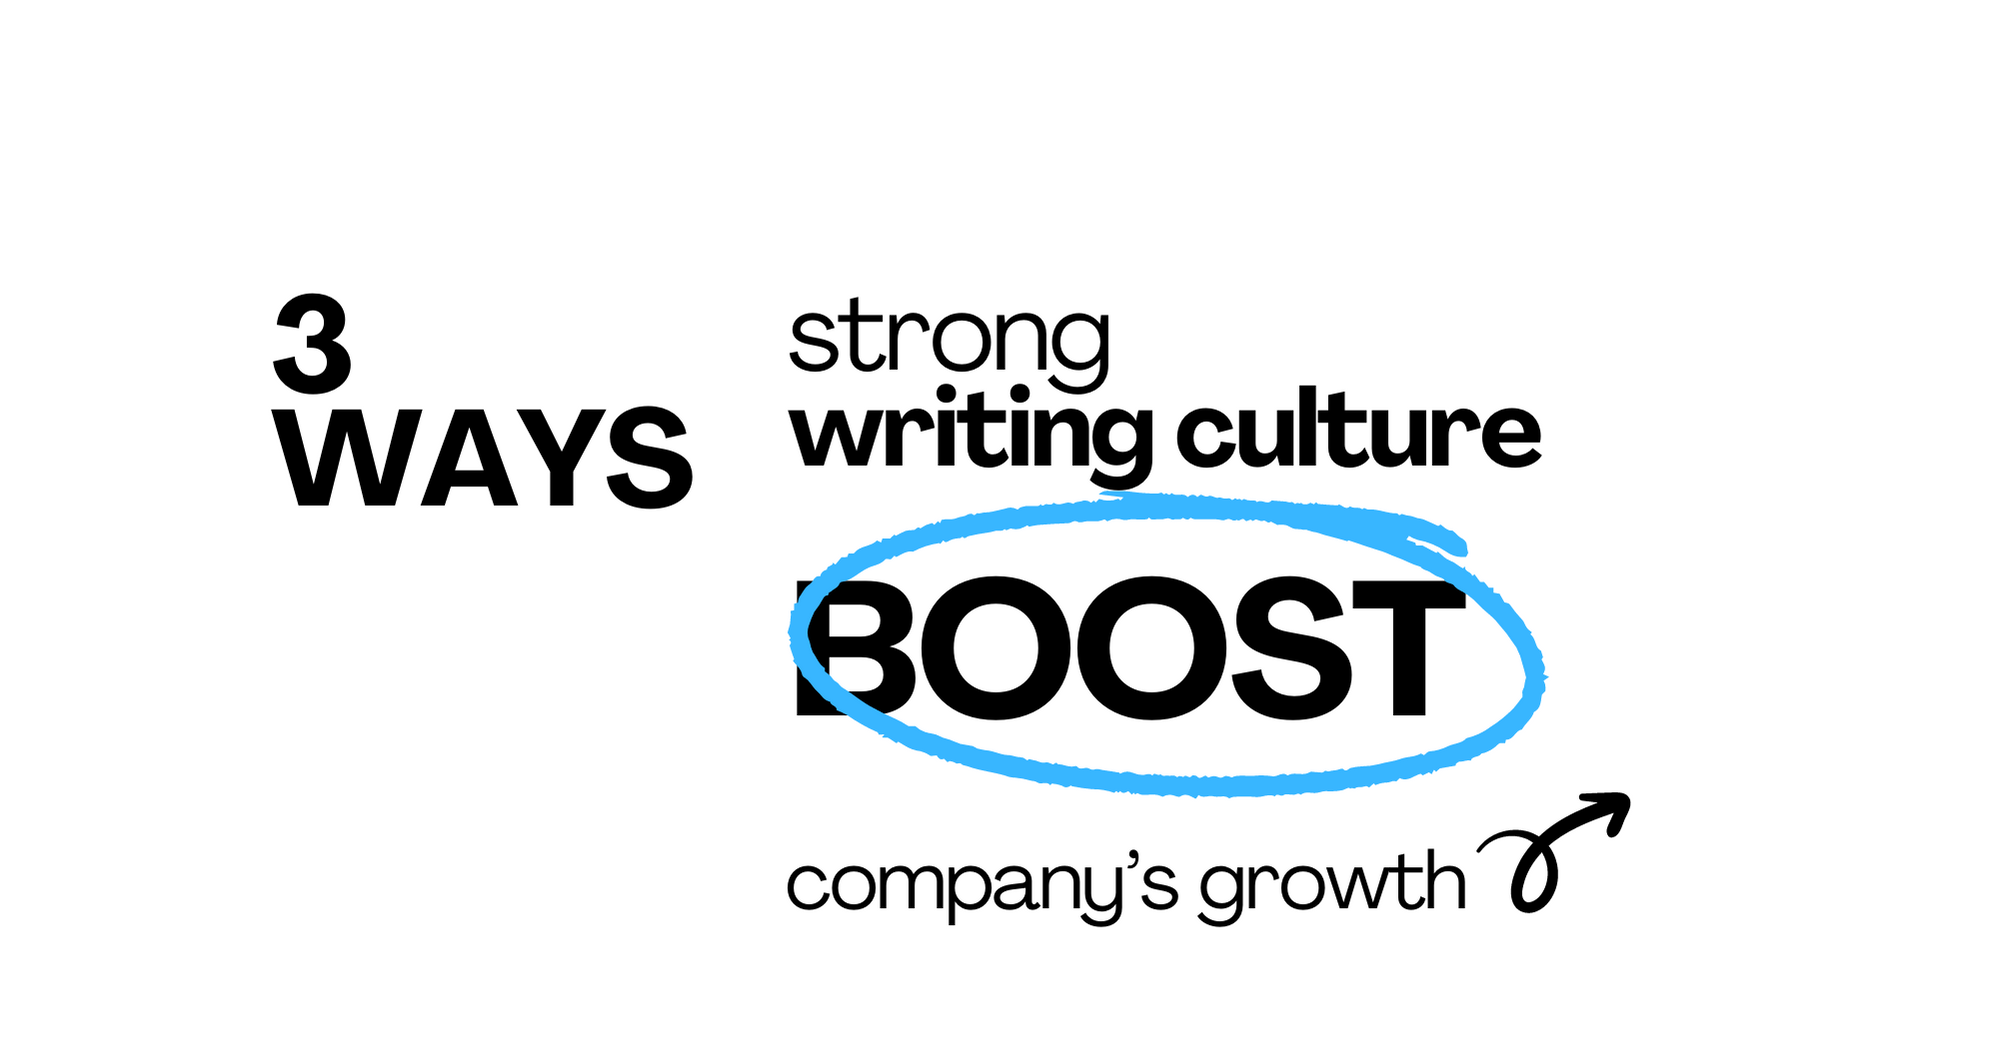 3 ways strong writing culture boosts company’s growth